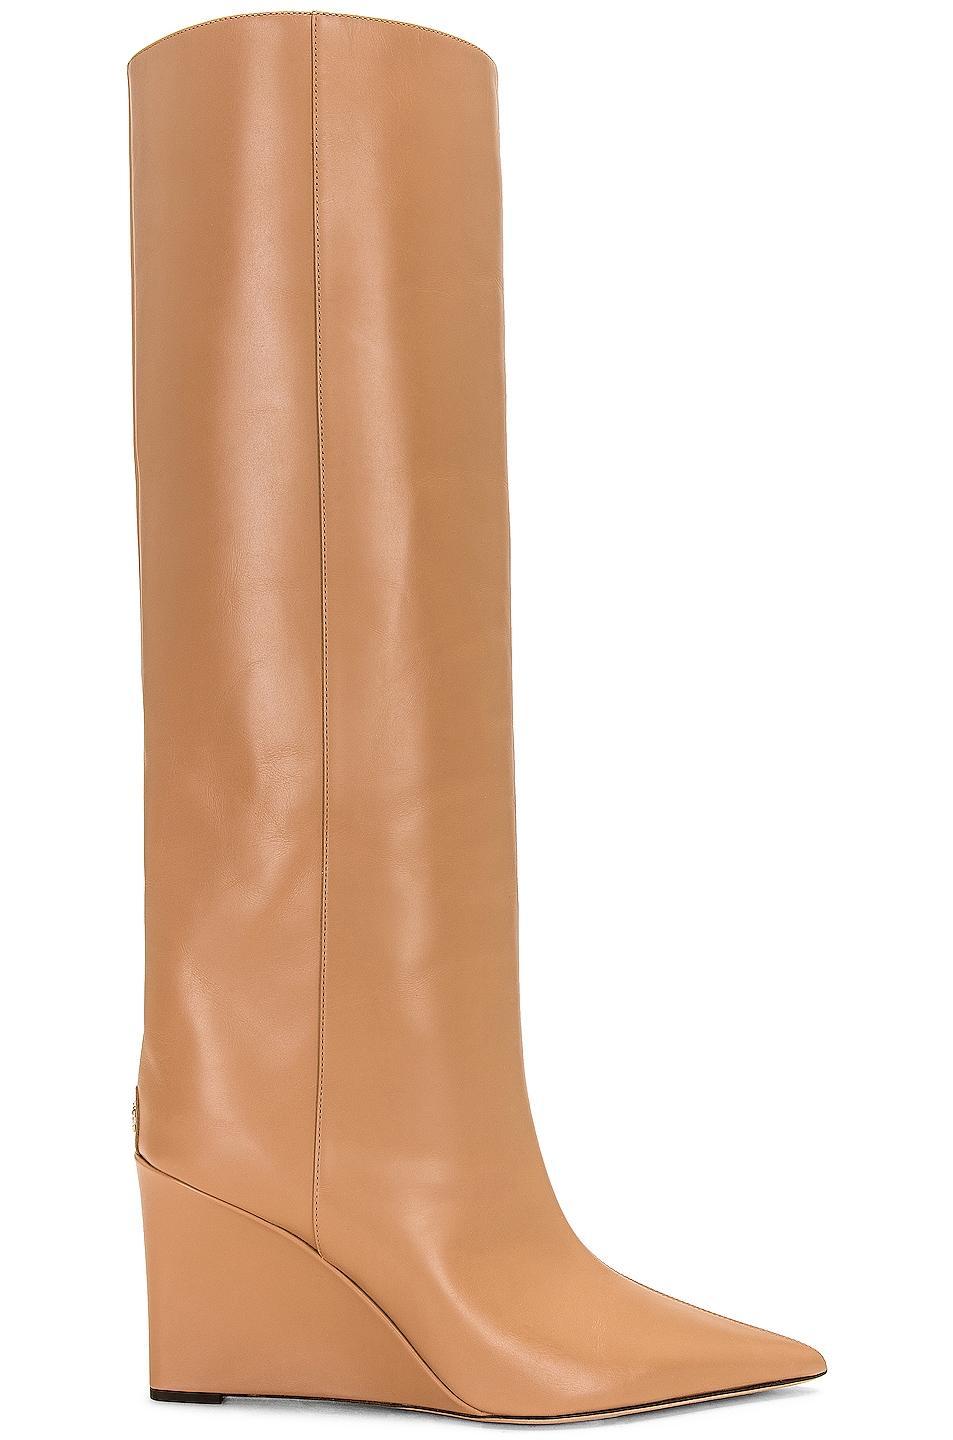 Jimmy Choo Blake 85 Leather Wedge Boot in Nude Product Image